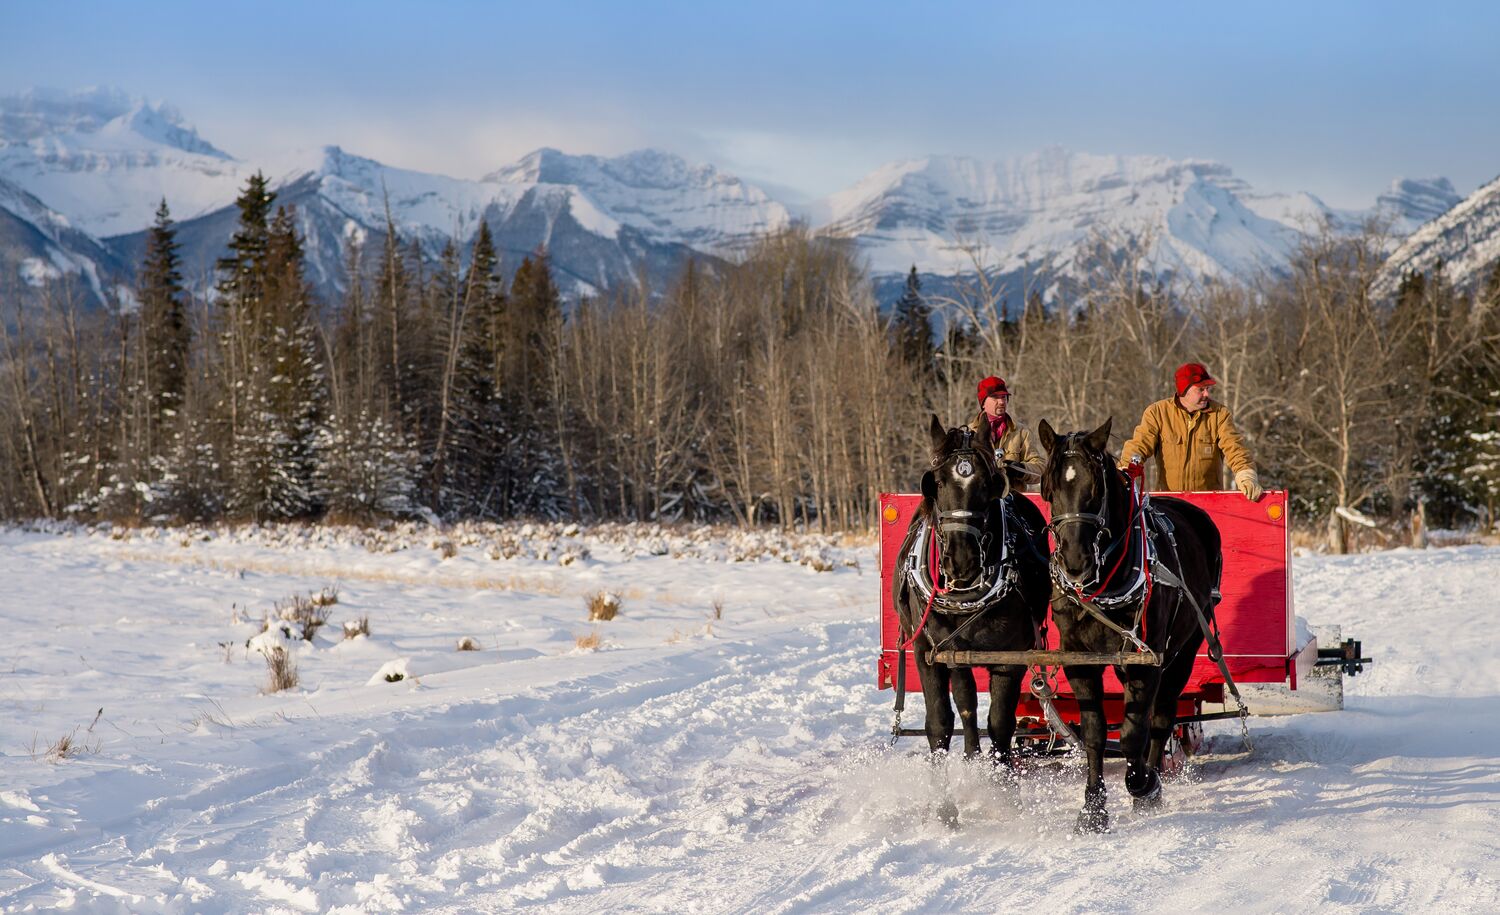 The guests are enjoying the horse sleigh riding at Fairmont Banff Springs.